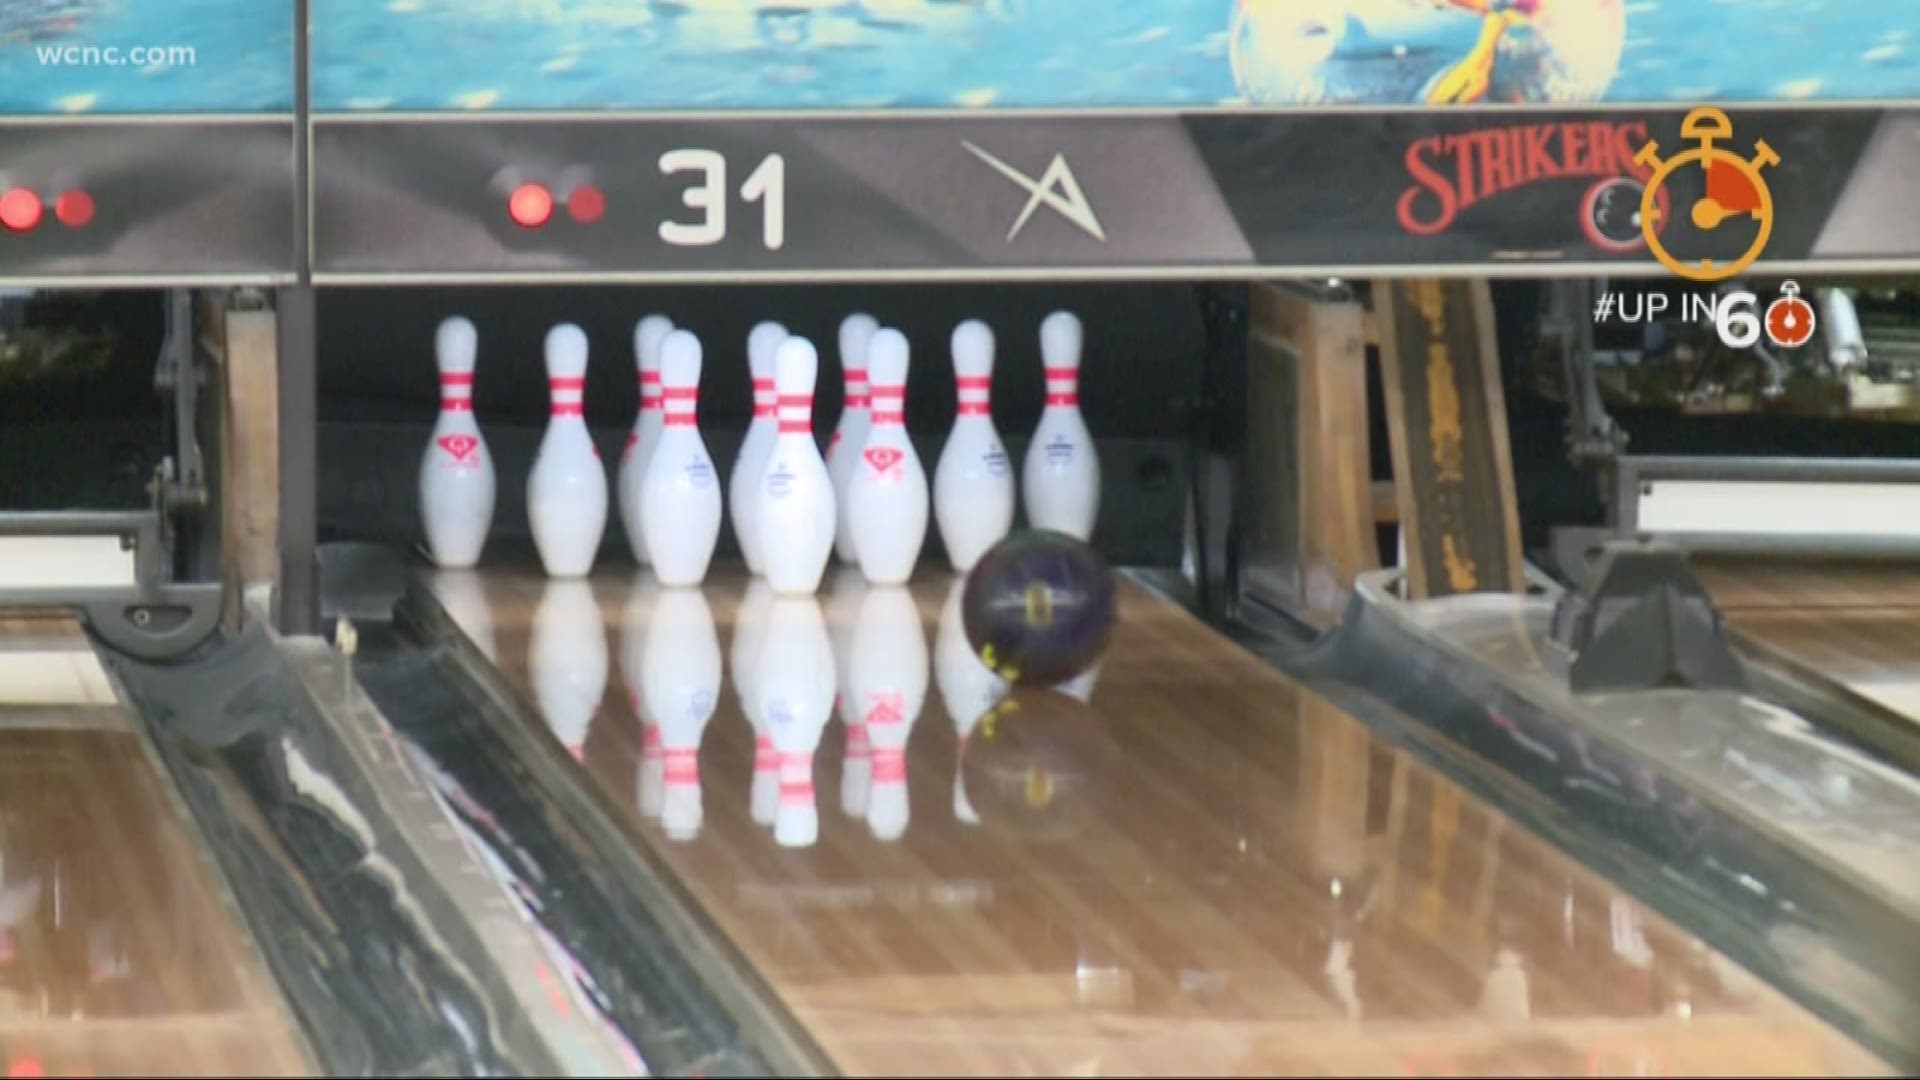 Up in 60: Kids bowl for free at this local bowling alley